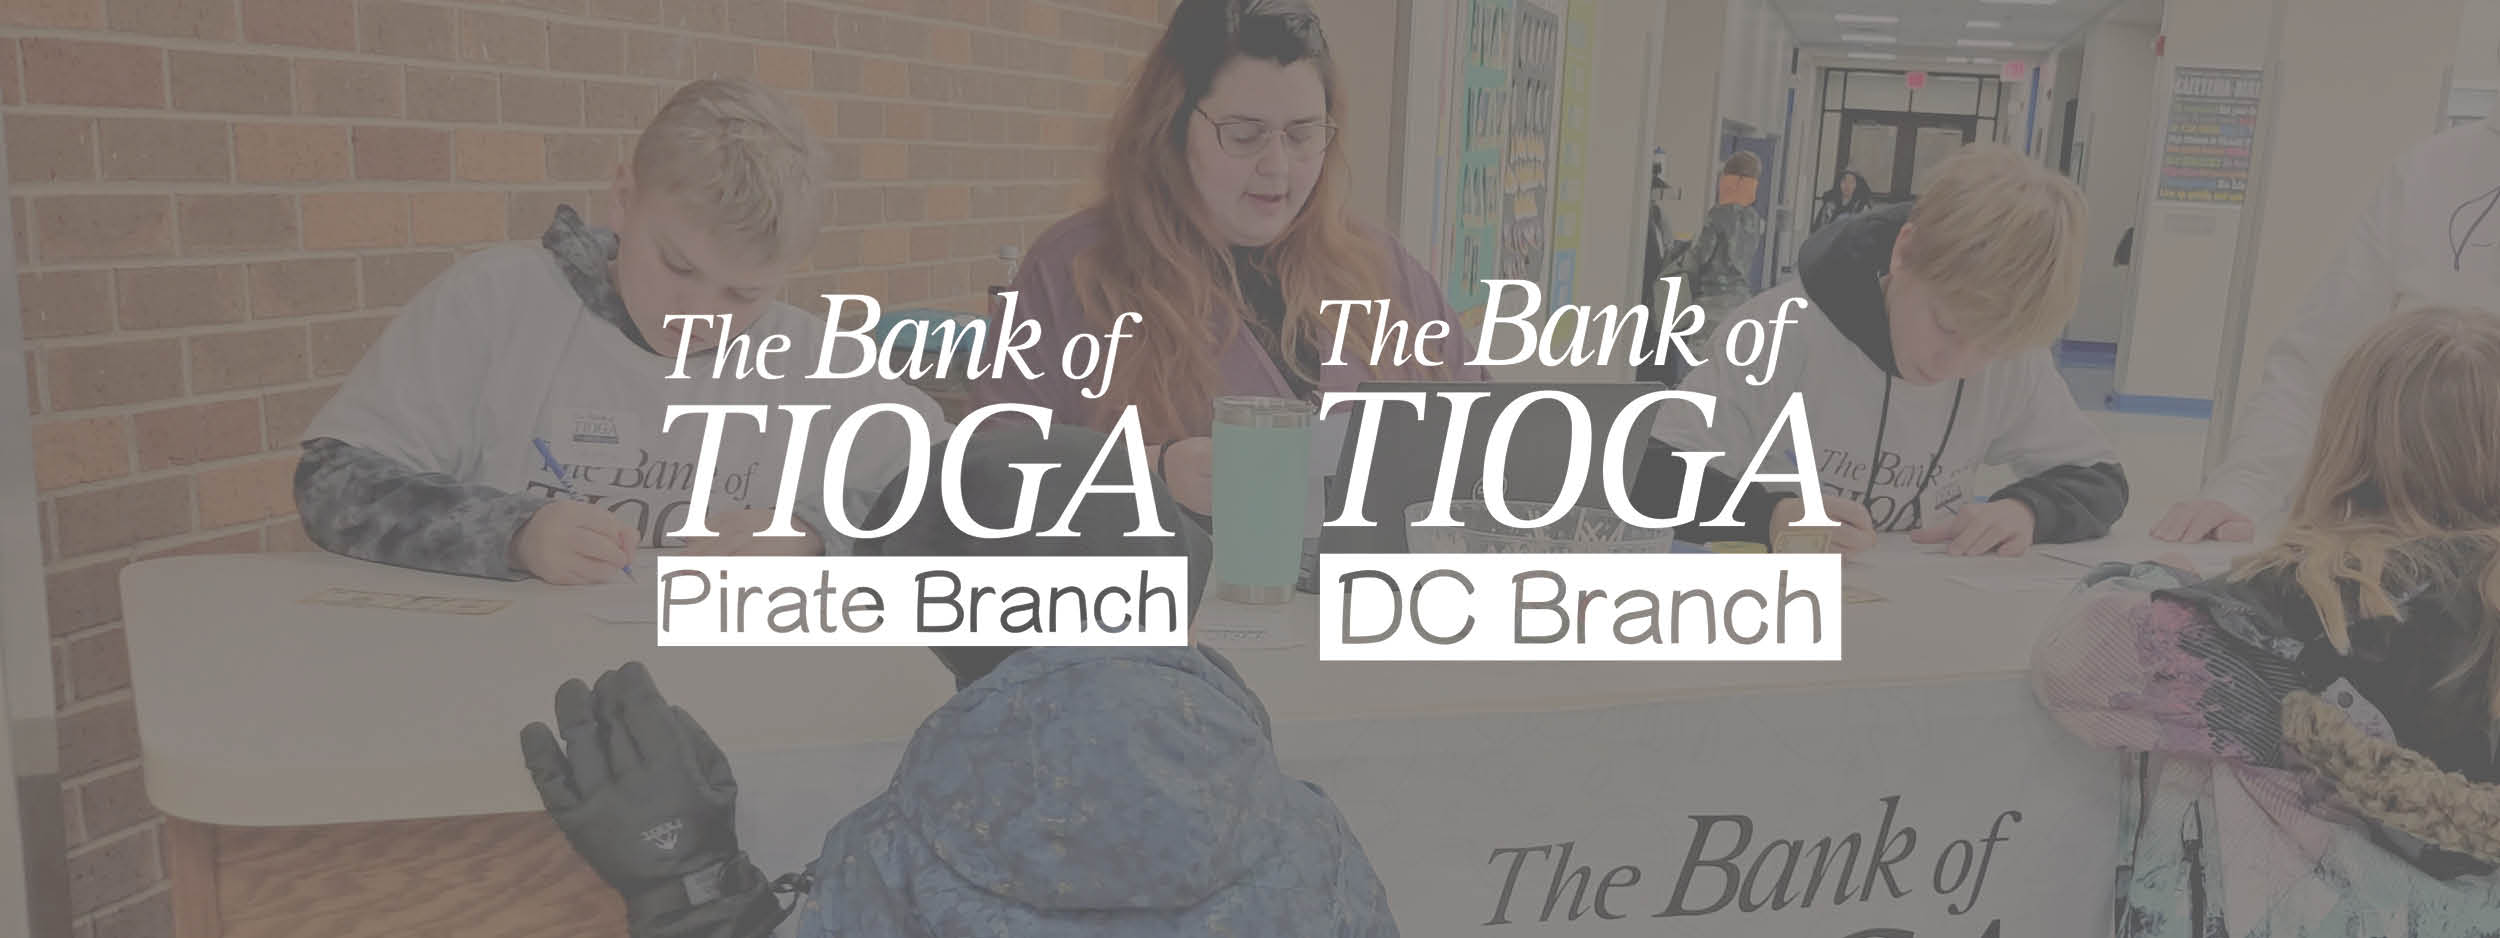 The Bank of Tioga Pirate Branch and DC Branch student b